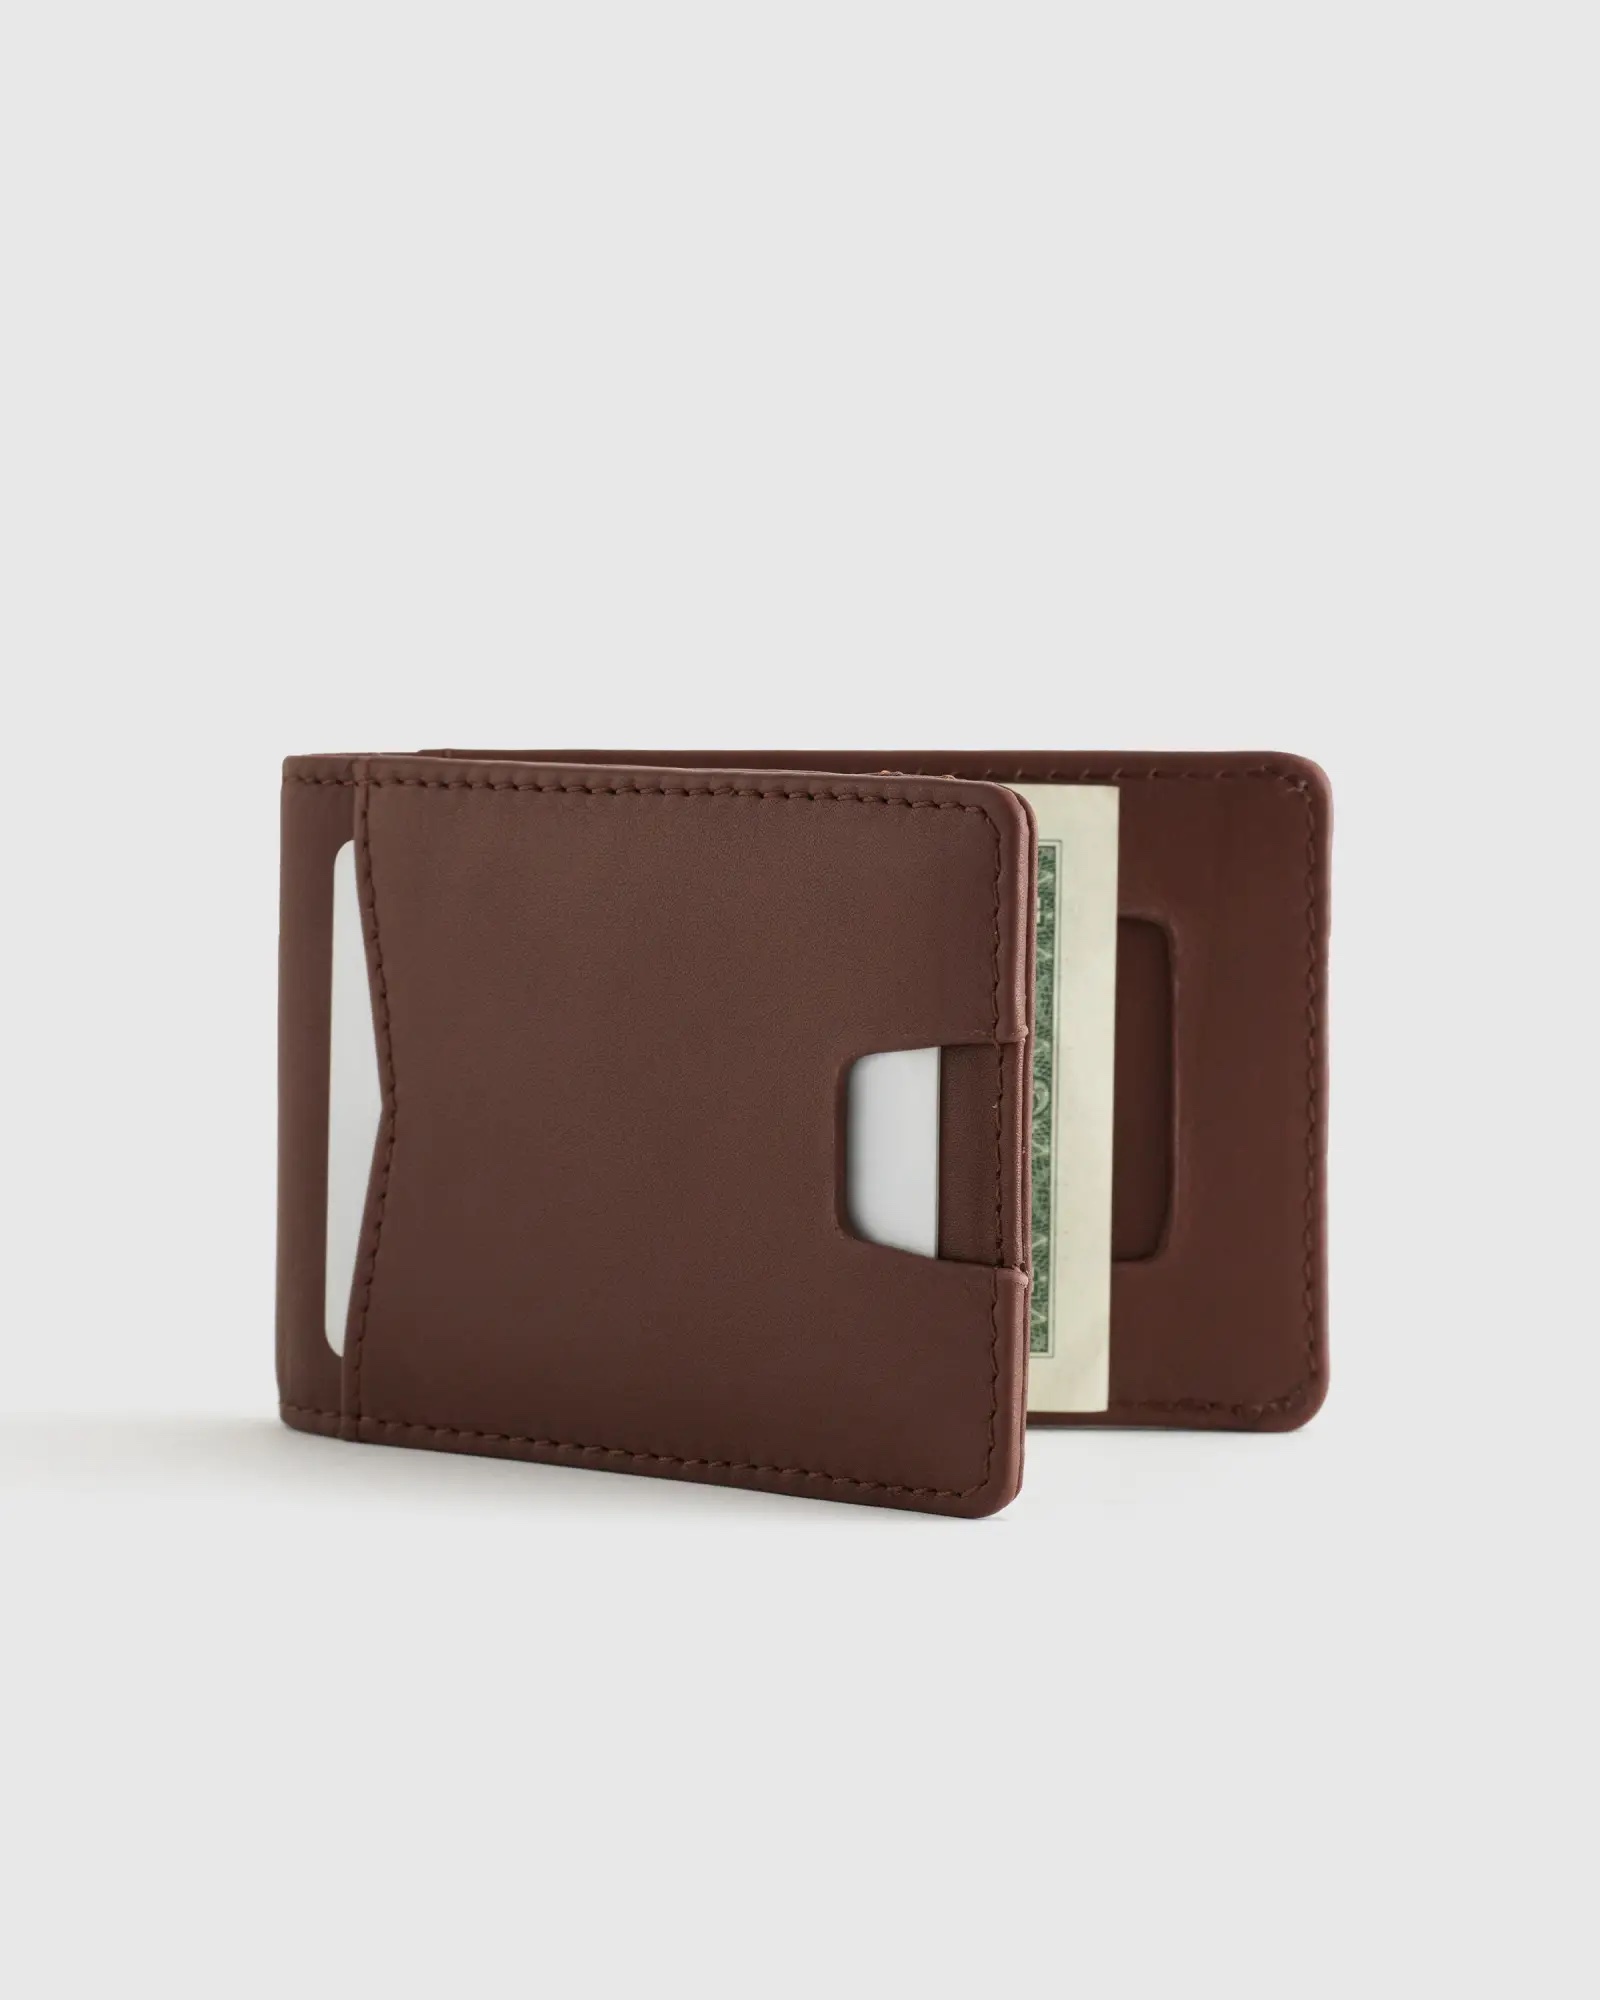 An open brown leather slim wallet.